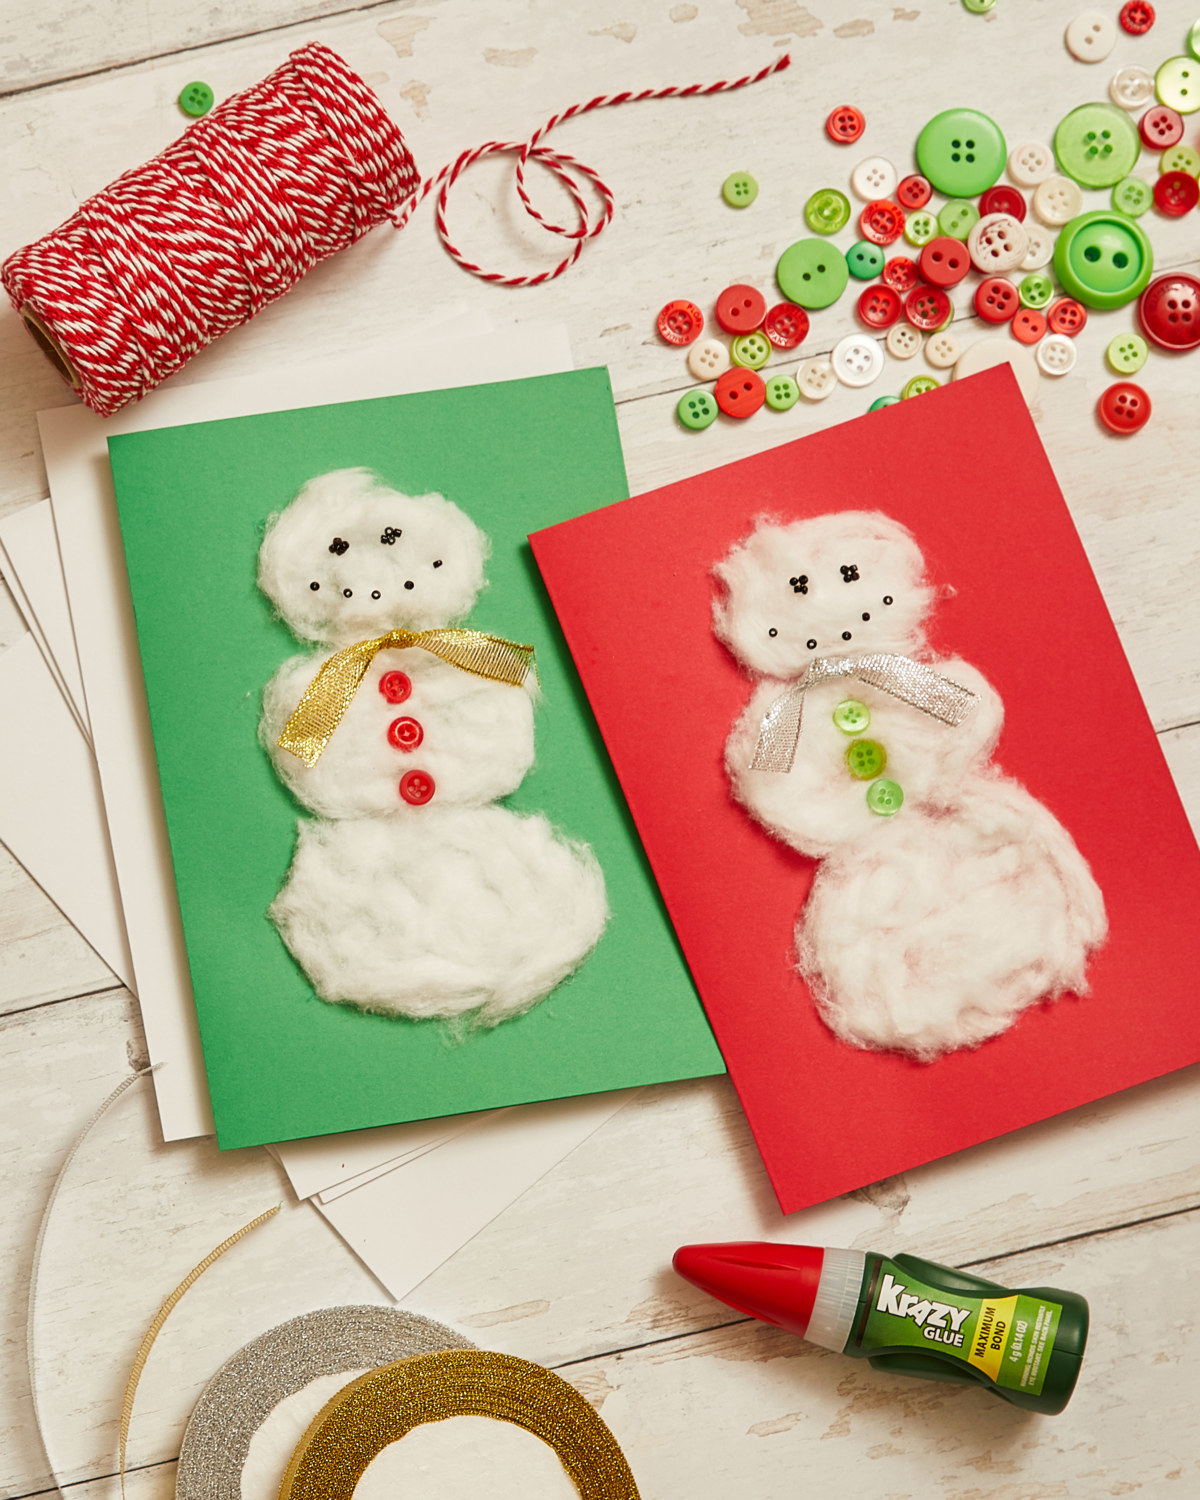 Completed cotton ball snowman card. Ribbon, buttons, and Krazy Glue arranged nicely on wooden table.